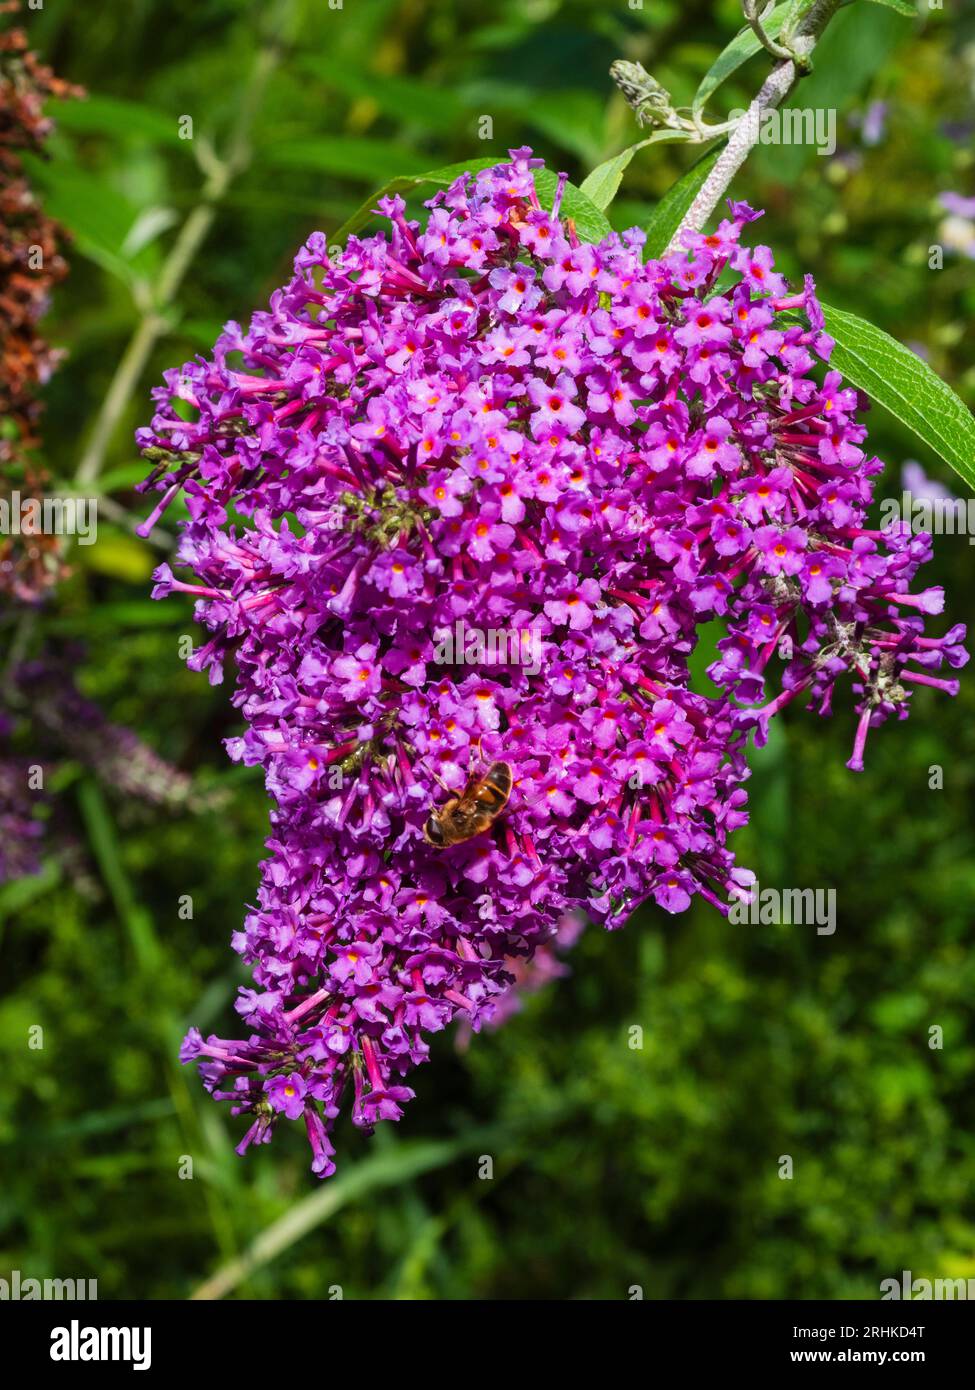 Unusual branching panicles laden with fragrant flowers of the hardy butterfly bush, Buddleja davidii 'Dartmoor' Stock Photo